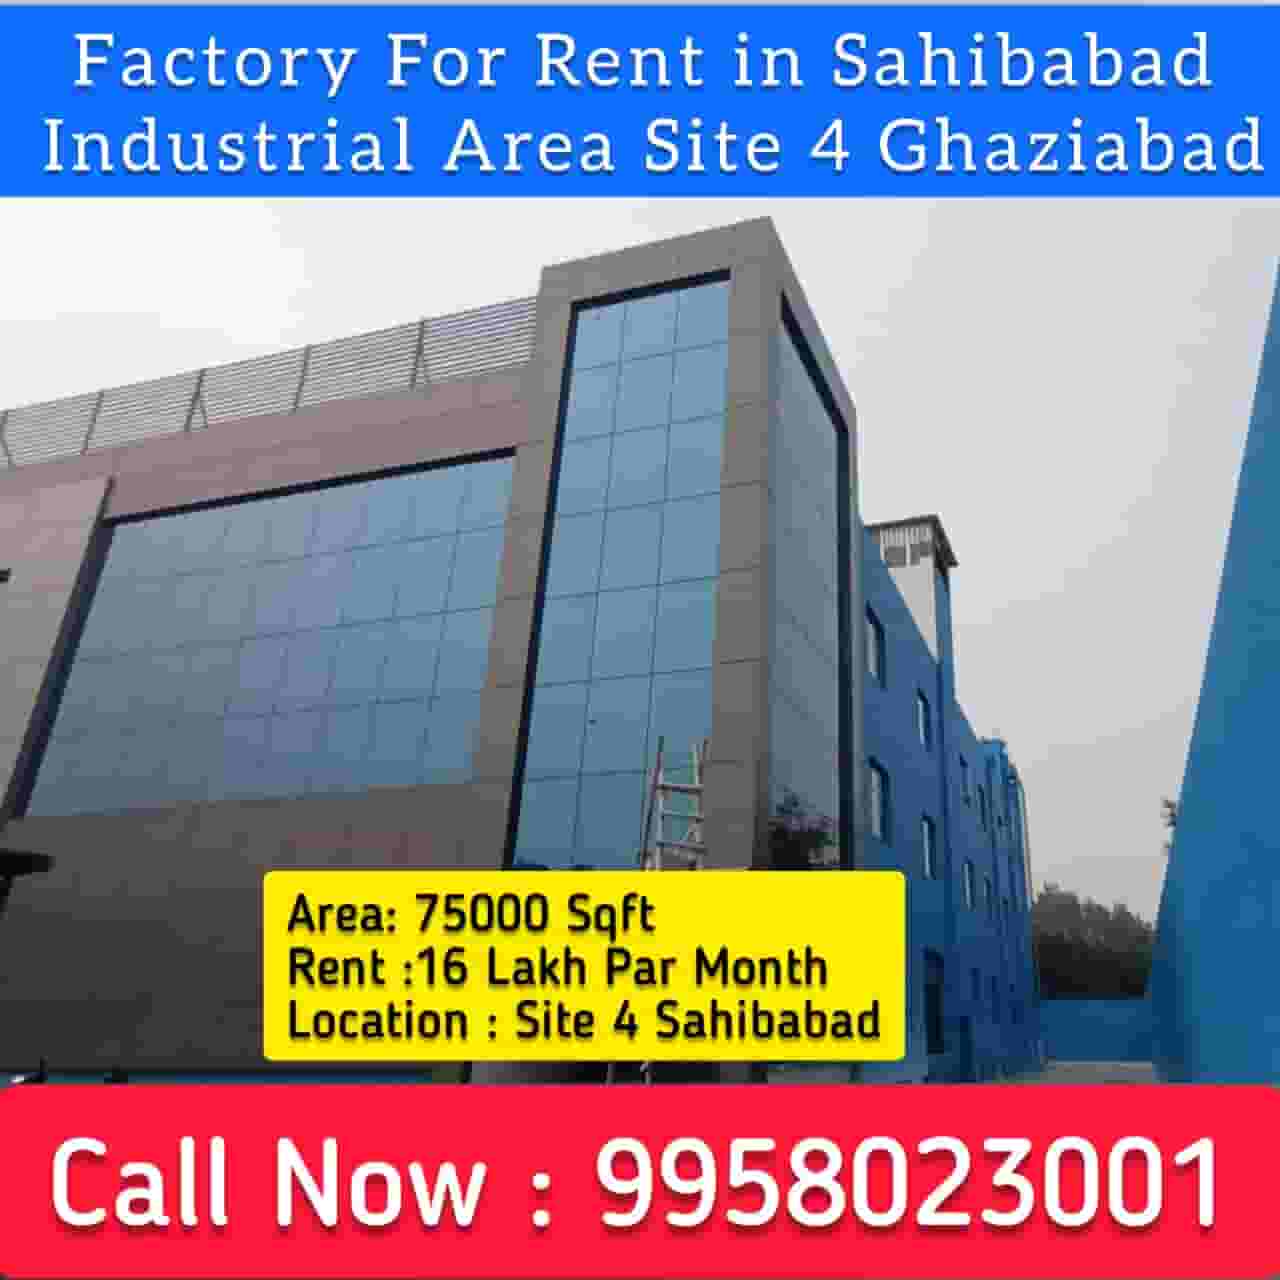 Factory for rent in sahibabad industrial area 